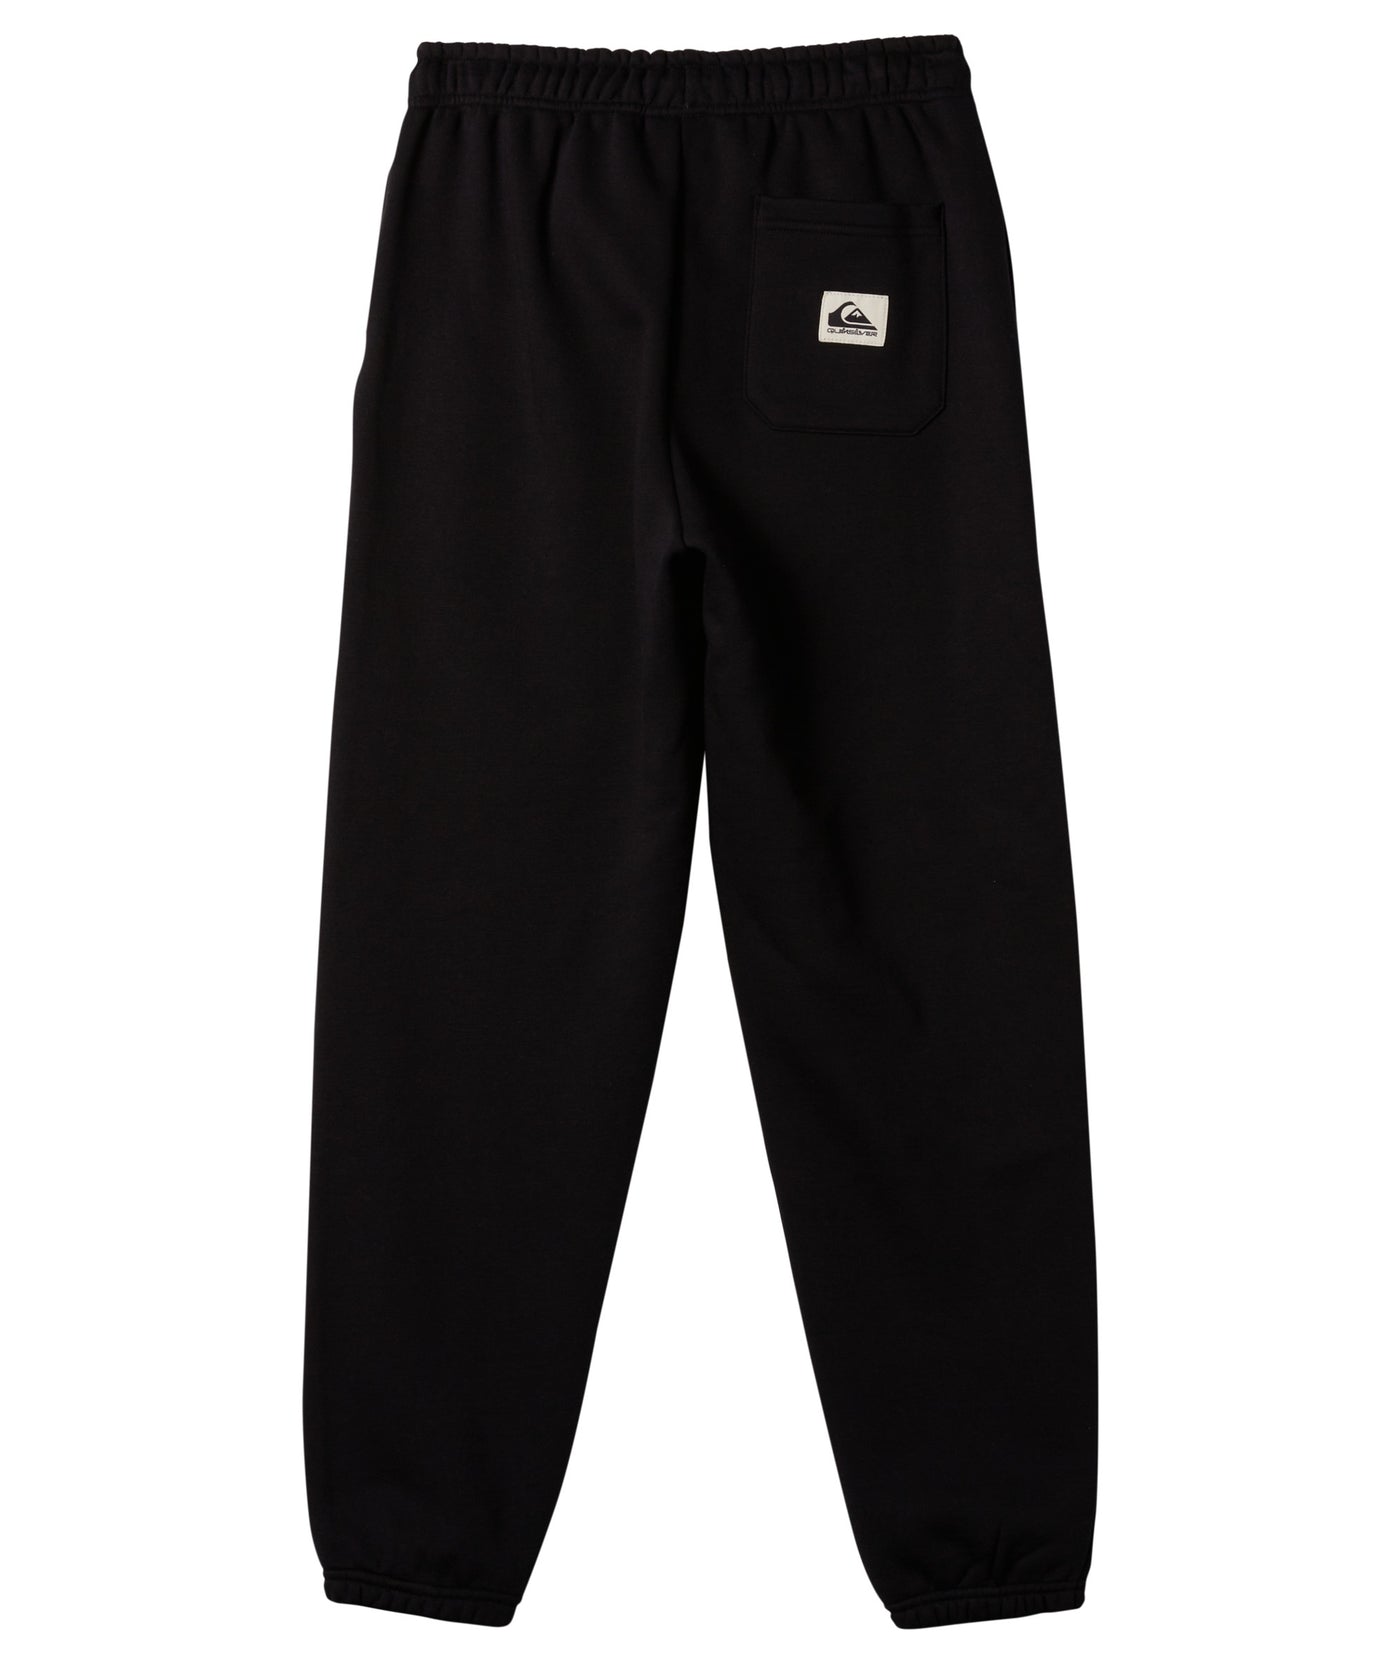 Quiksilver Rainmaker Jogger Youth